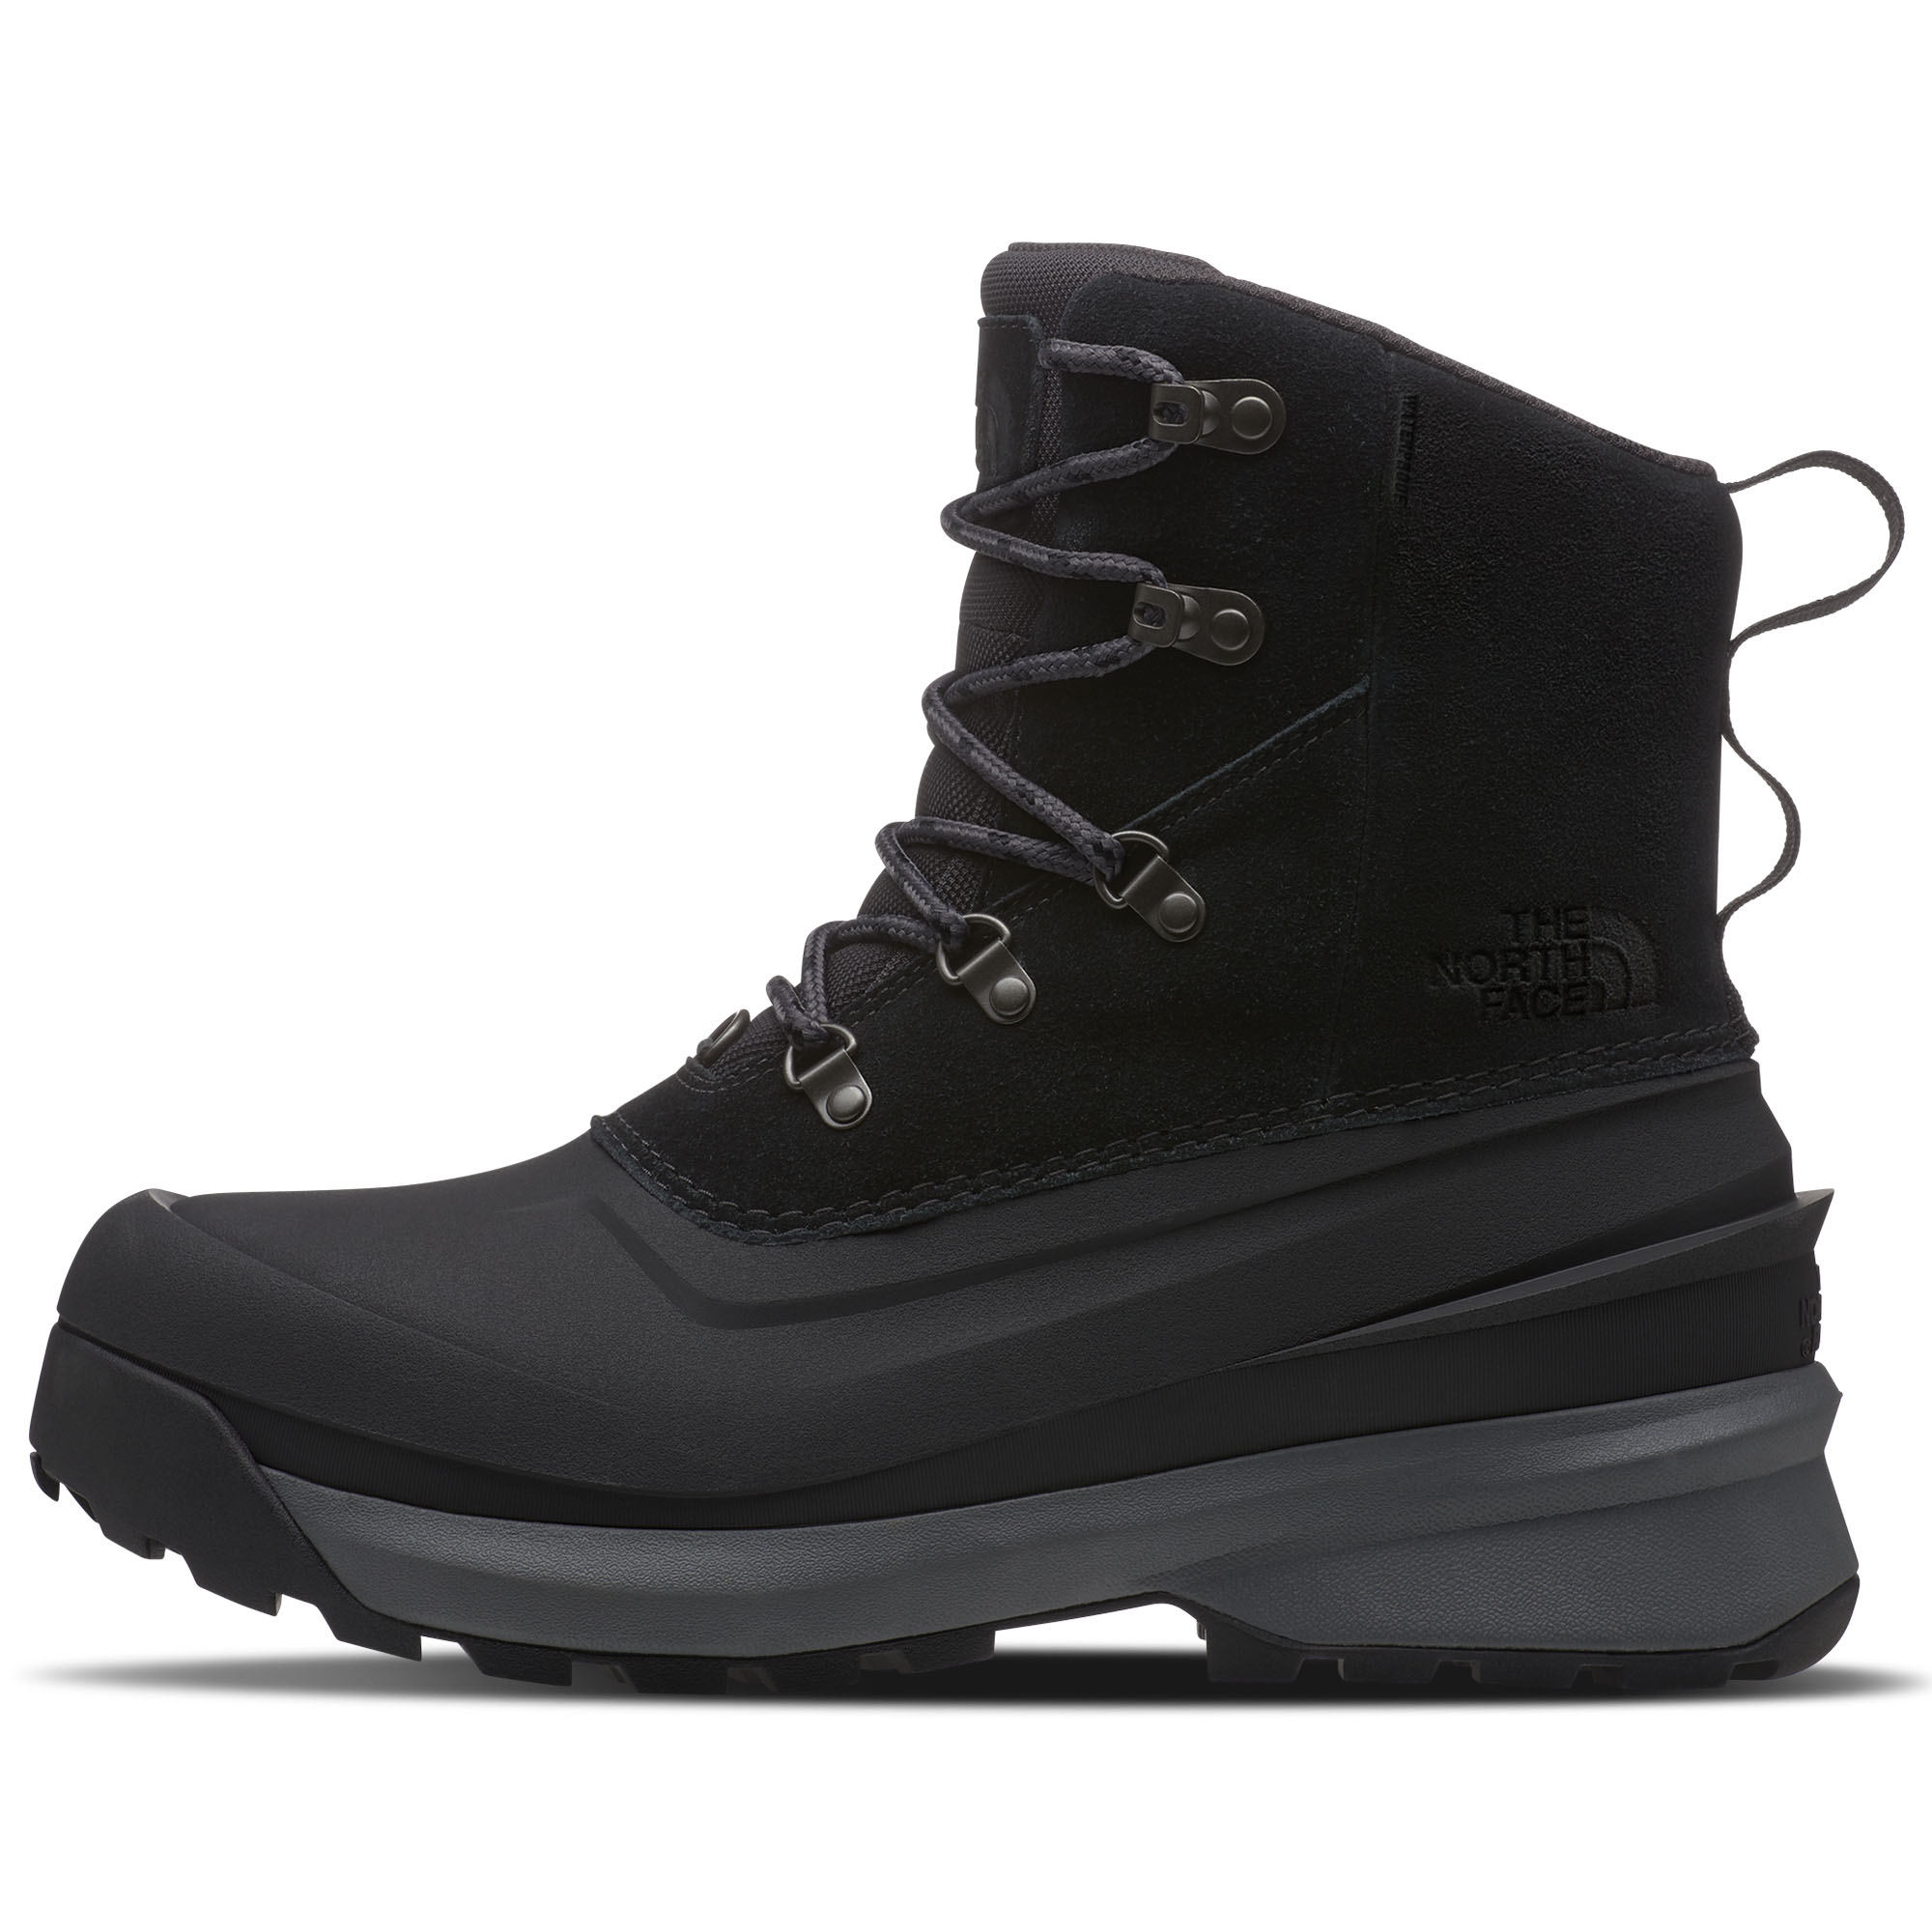 The North Face Men's Chilkat V Lace Waterproof Boots -  00196247369519